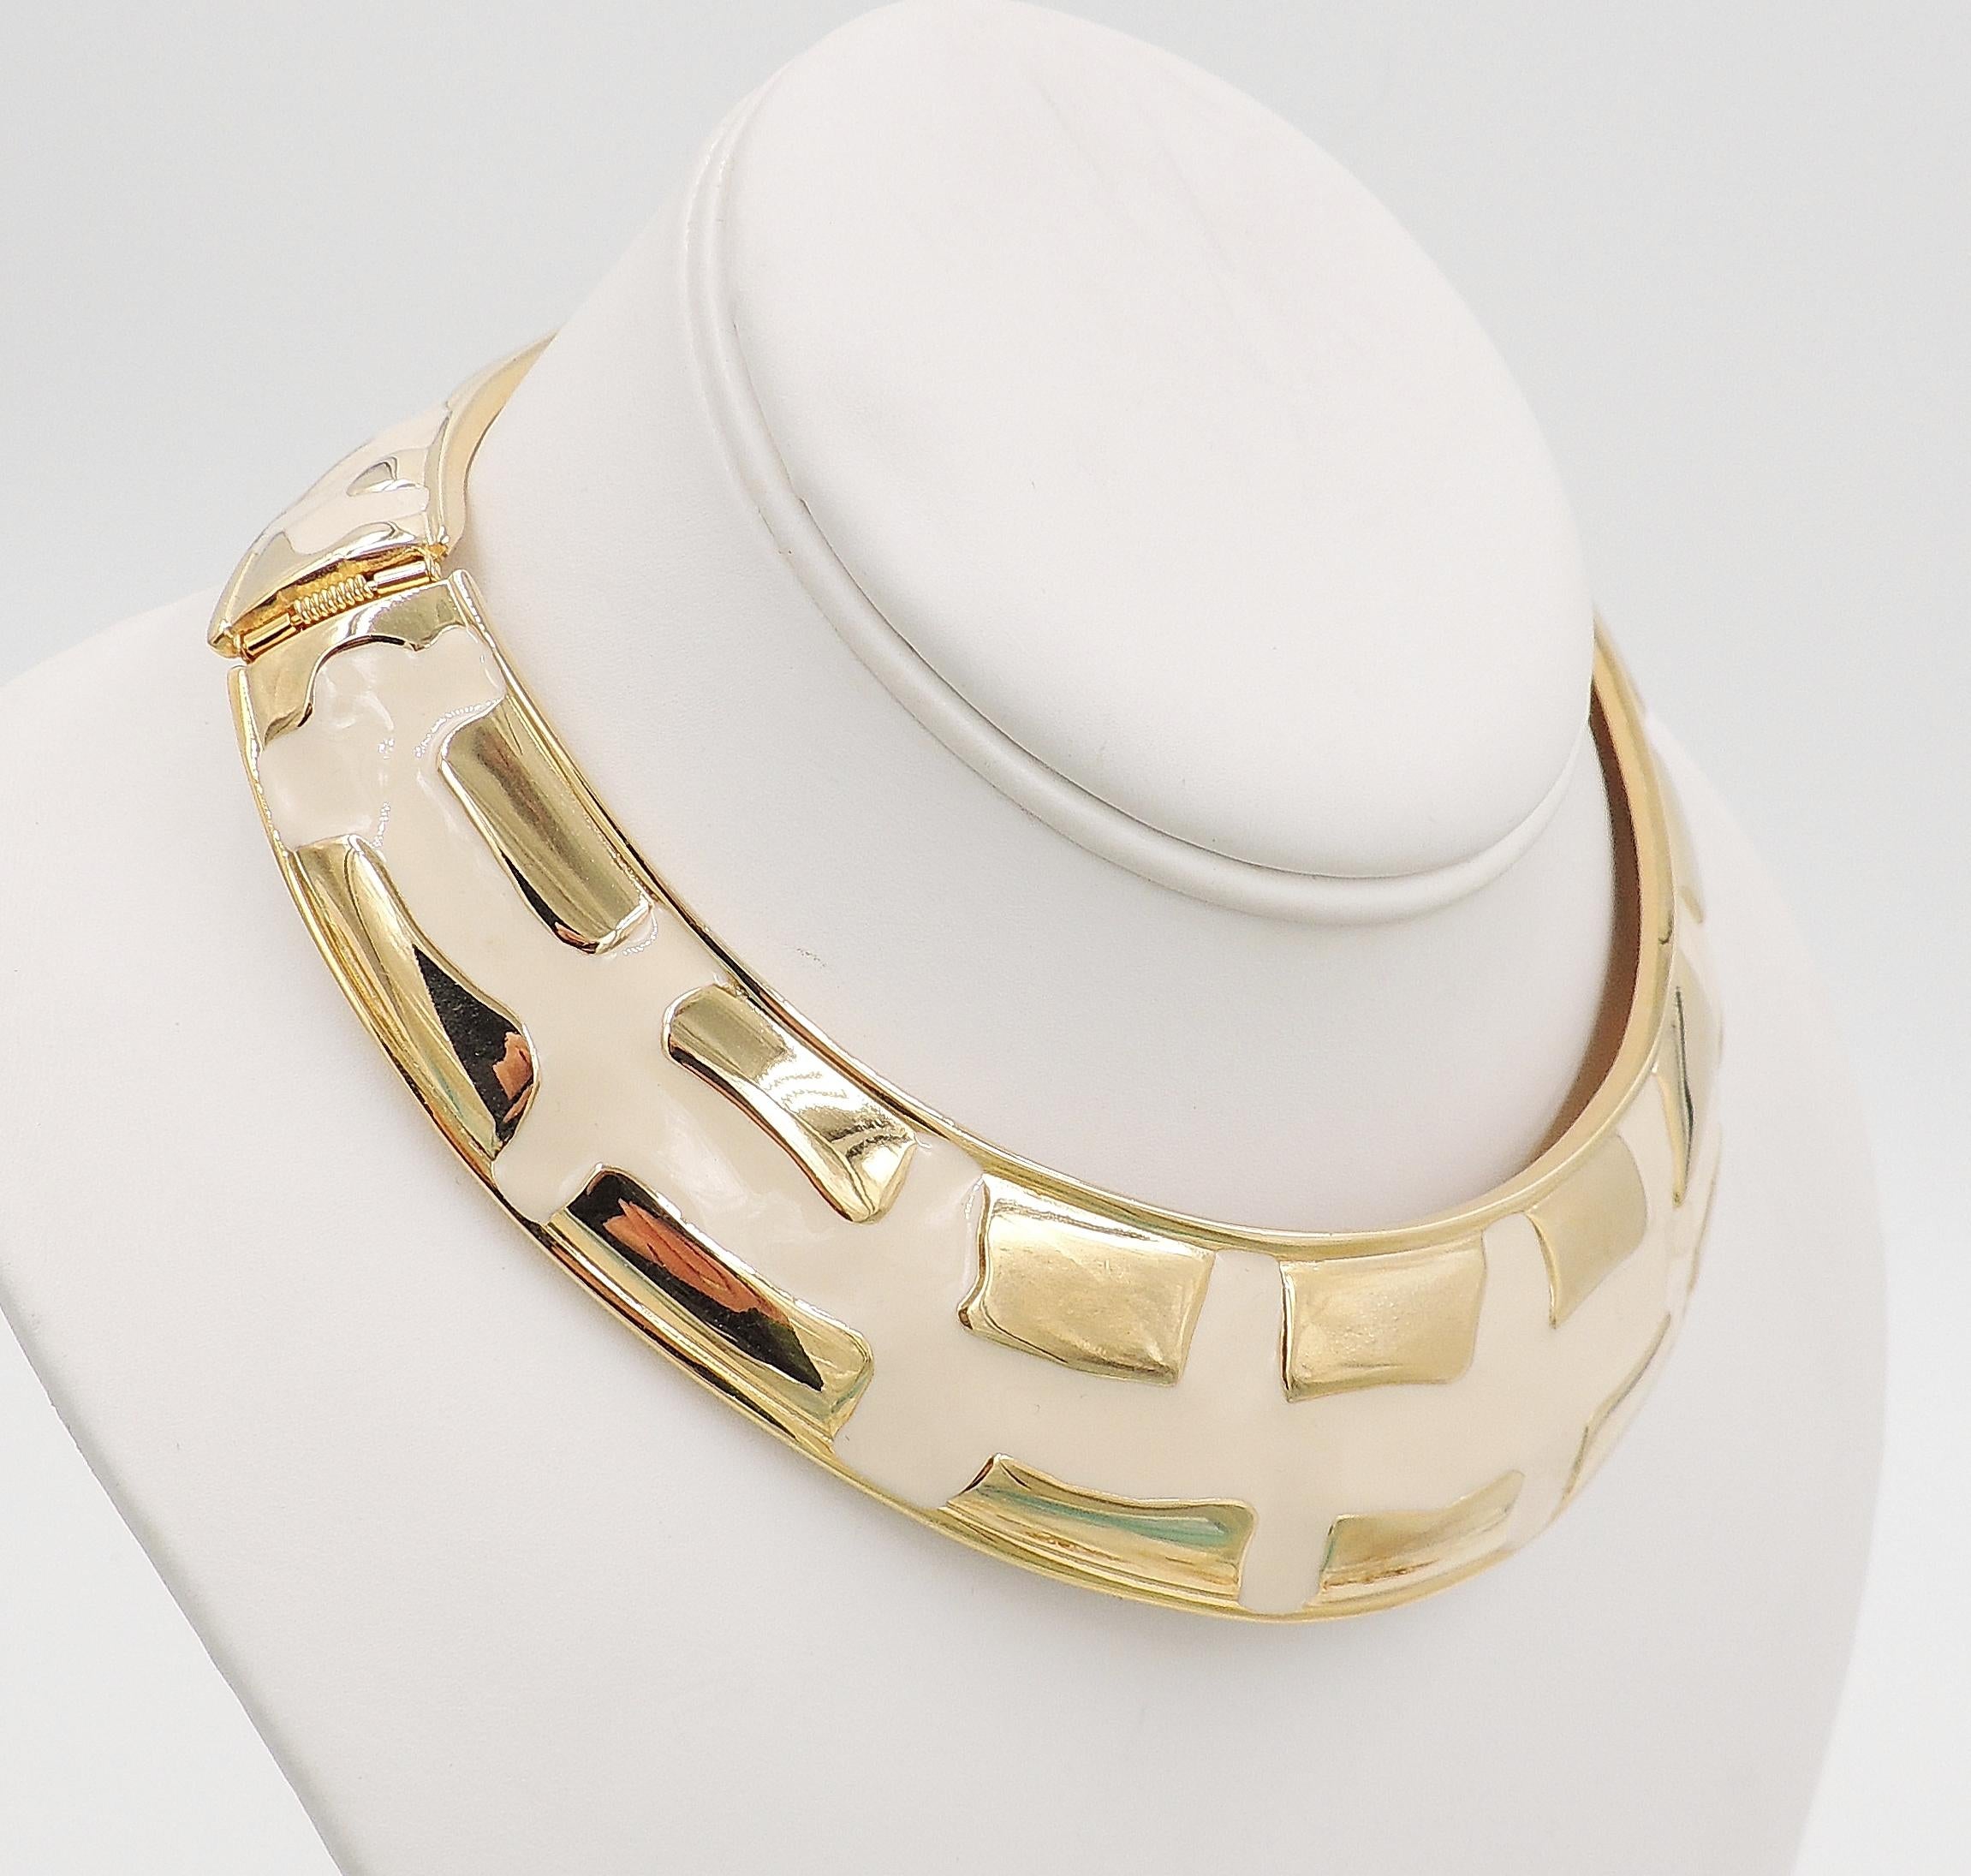 Circa 1980s modernist yellow gold plated and white enamel hinged collar necklace. Marked with Valentino Garavani's 